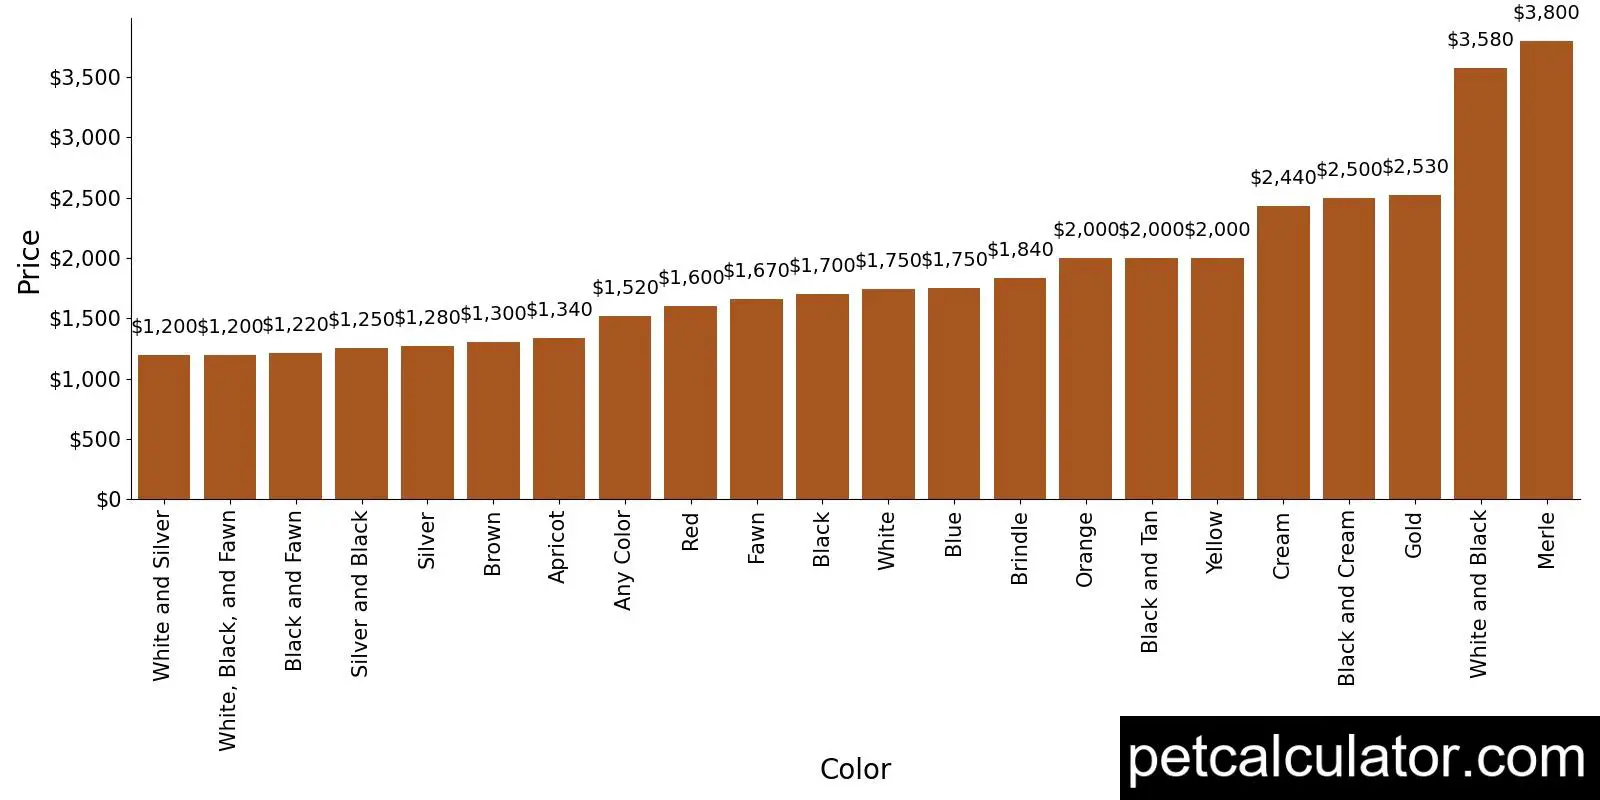 Price of Pug by Color 